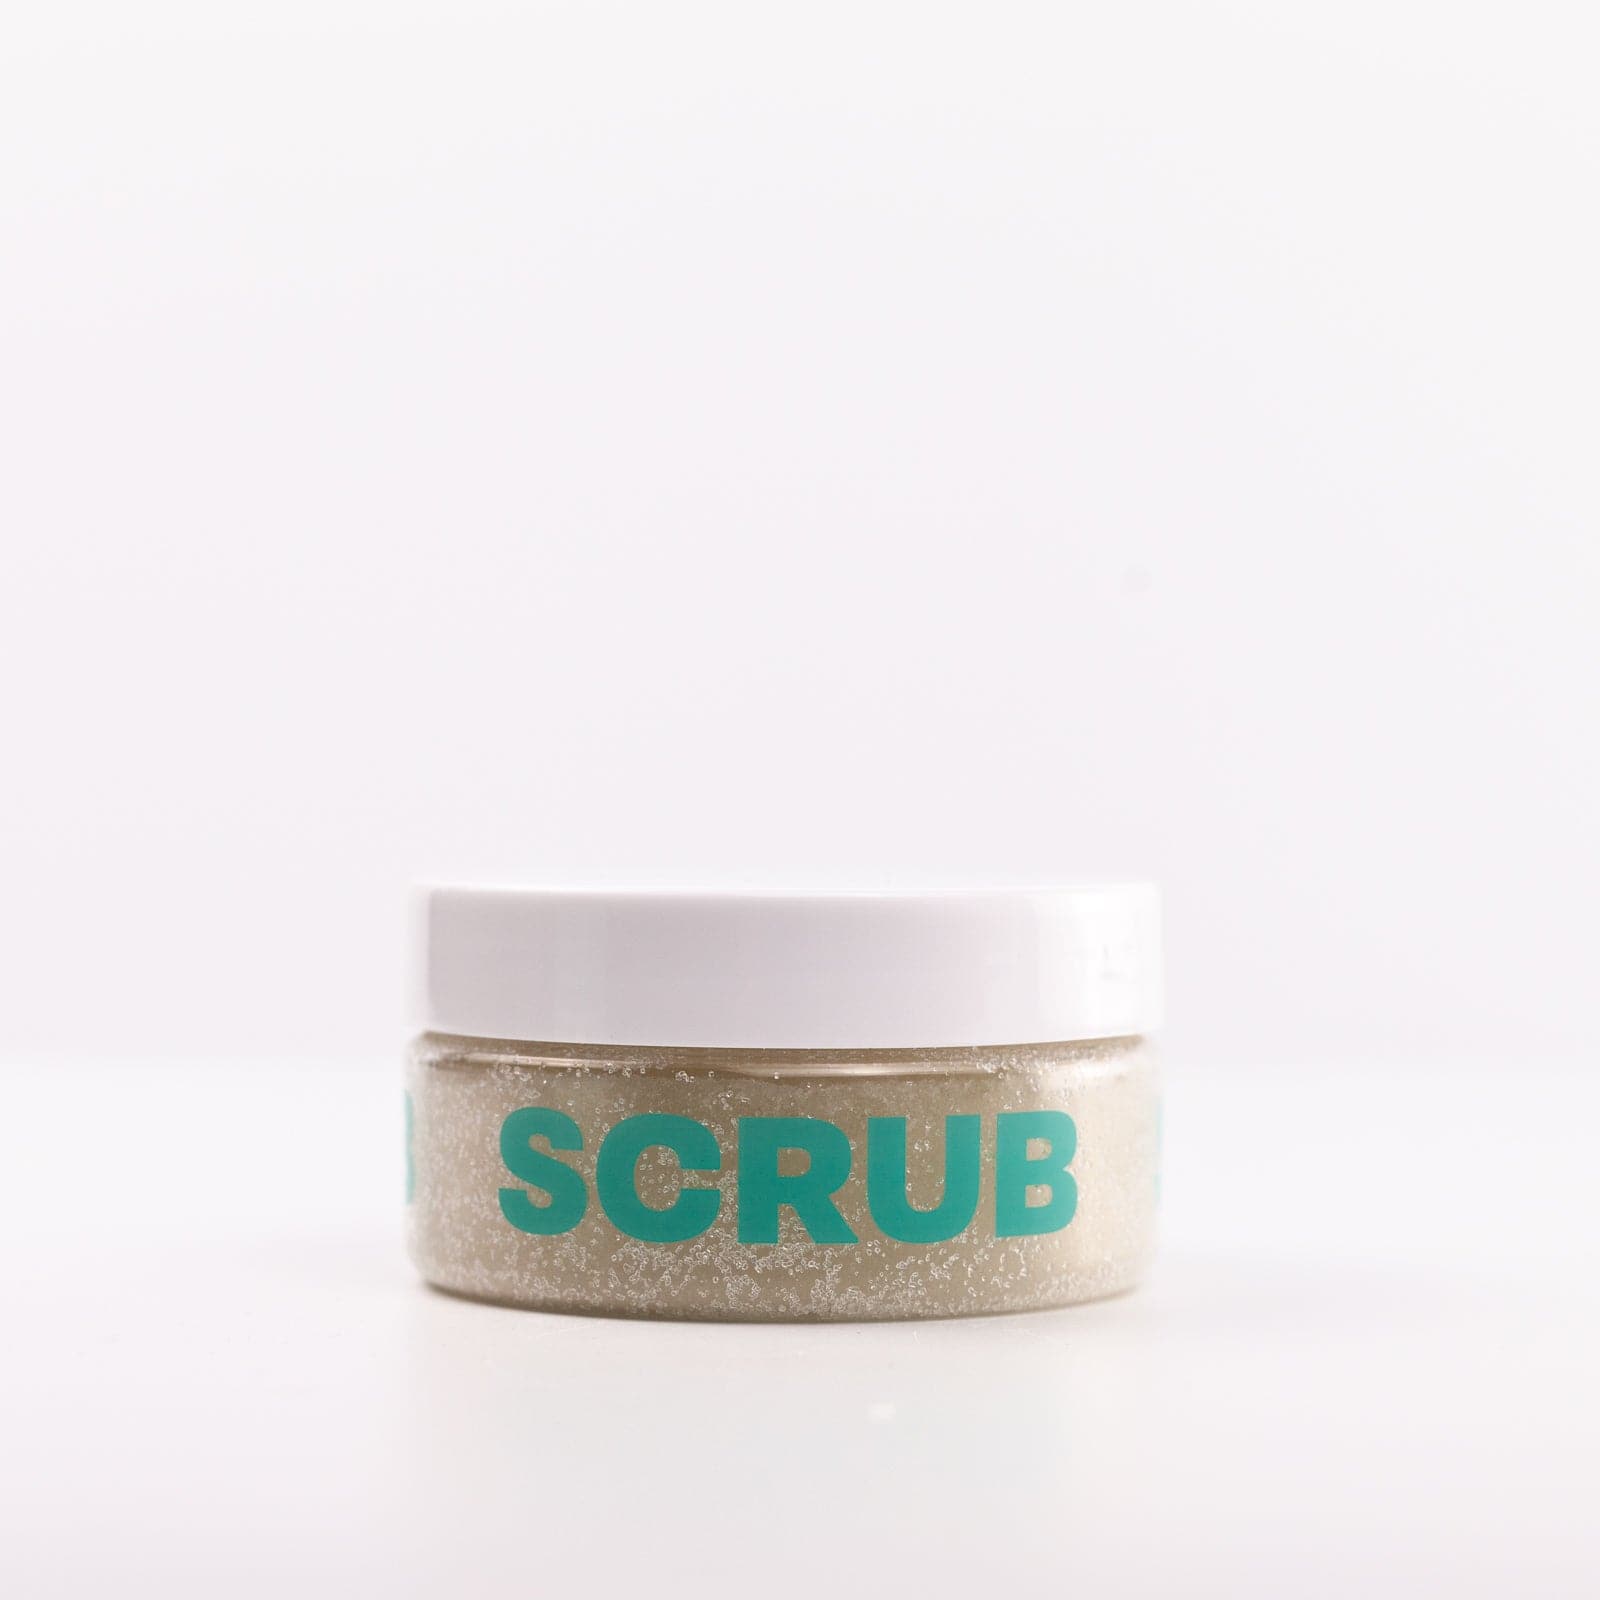 Clear Body Scrub container with teal lettering and white lid against white background